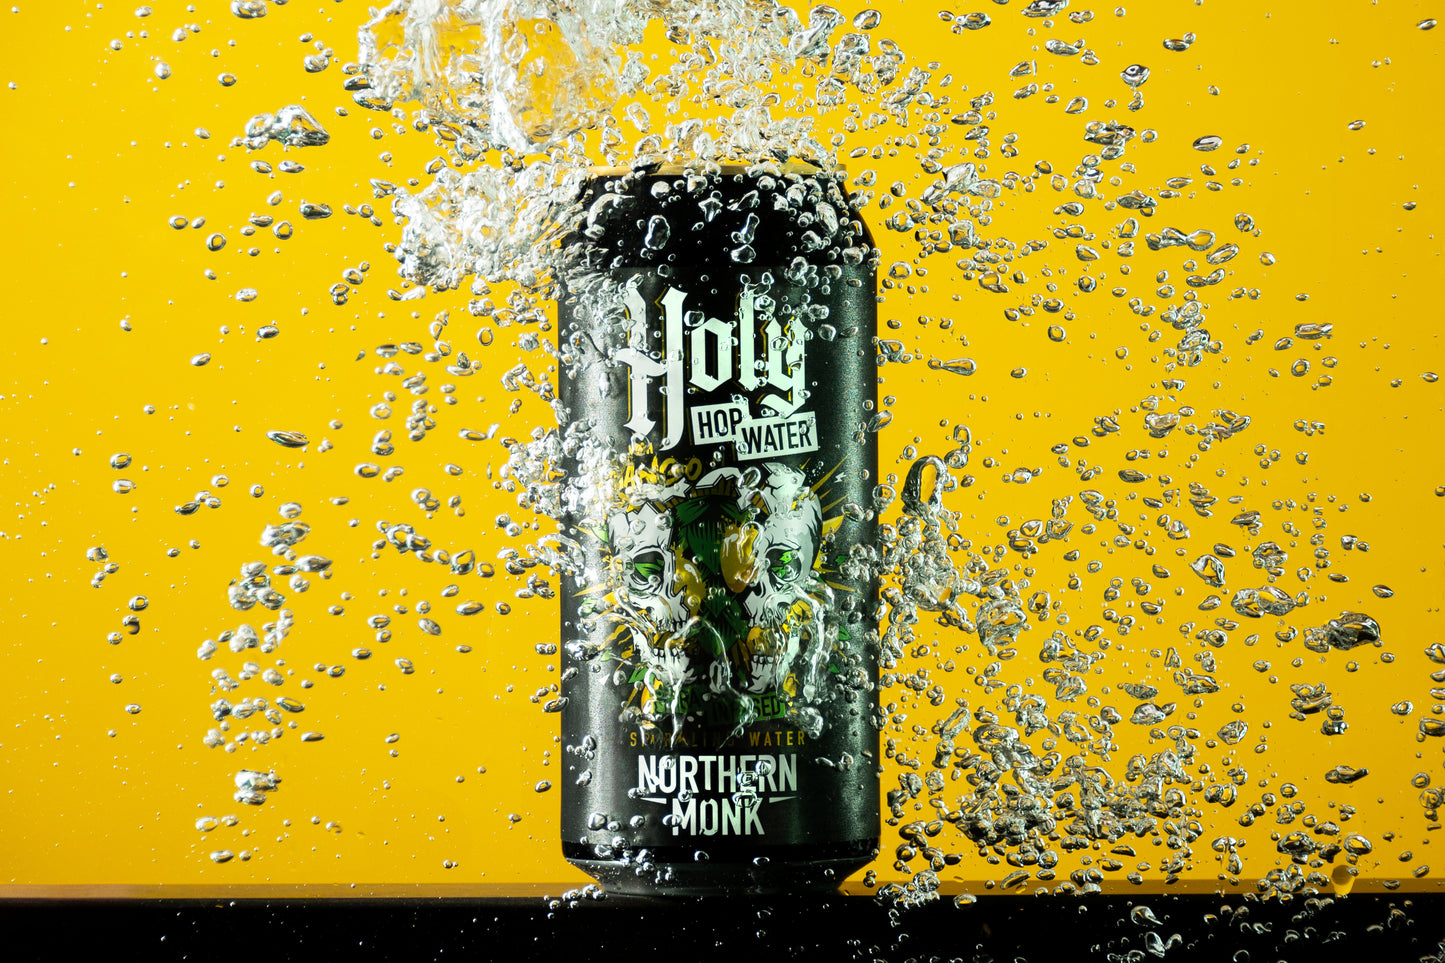 SHORT-DATED 12 PACK // HOLY HOP WATER MANGO // CITRA INFUSED SPARKLING HOP WATER